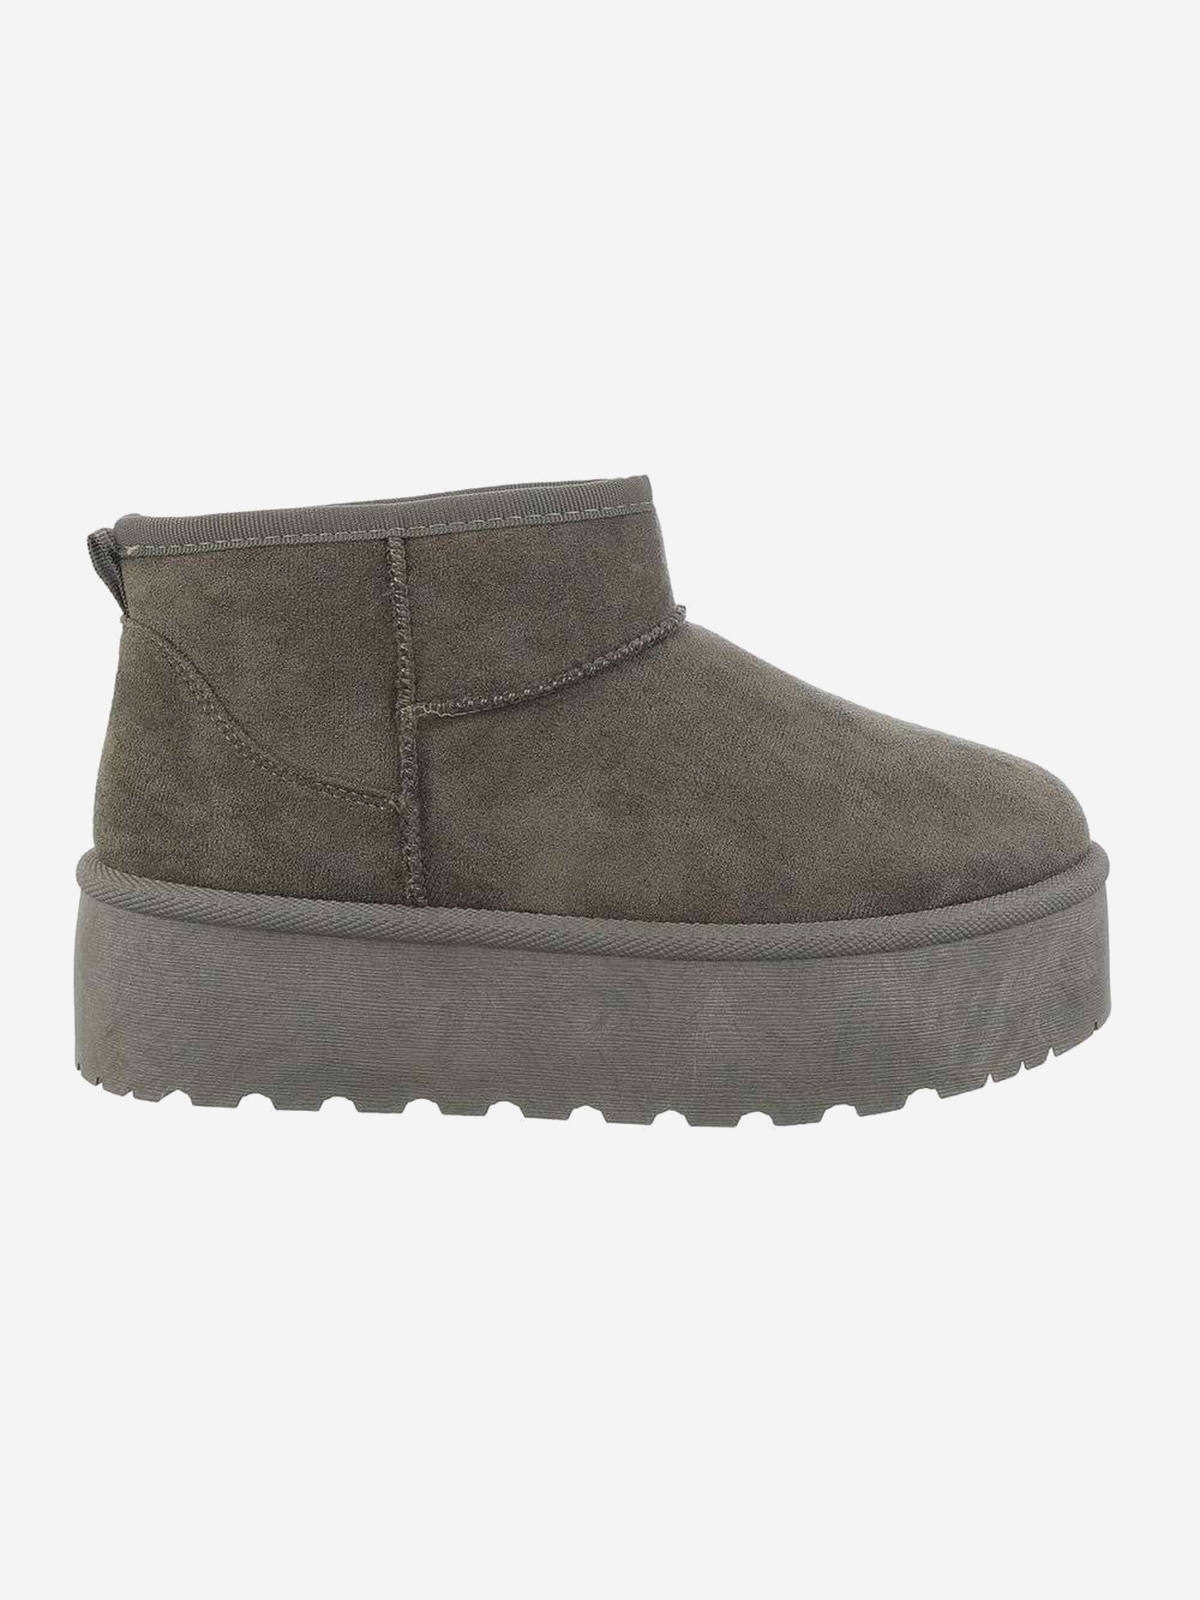 UGG type women's ankle shoes with platform in green